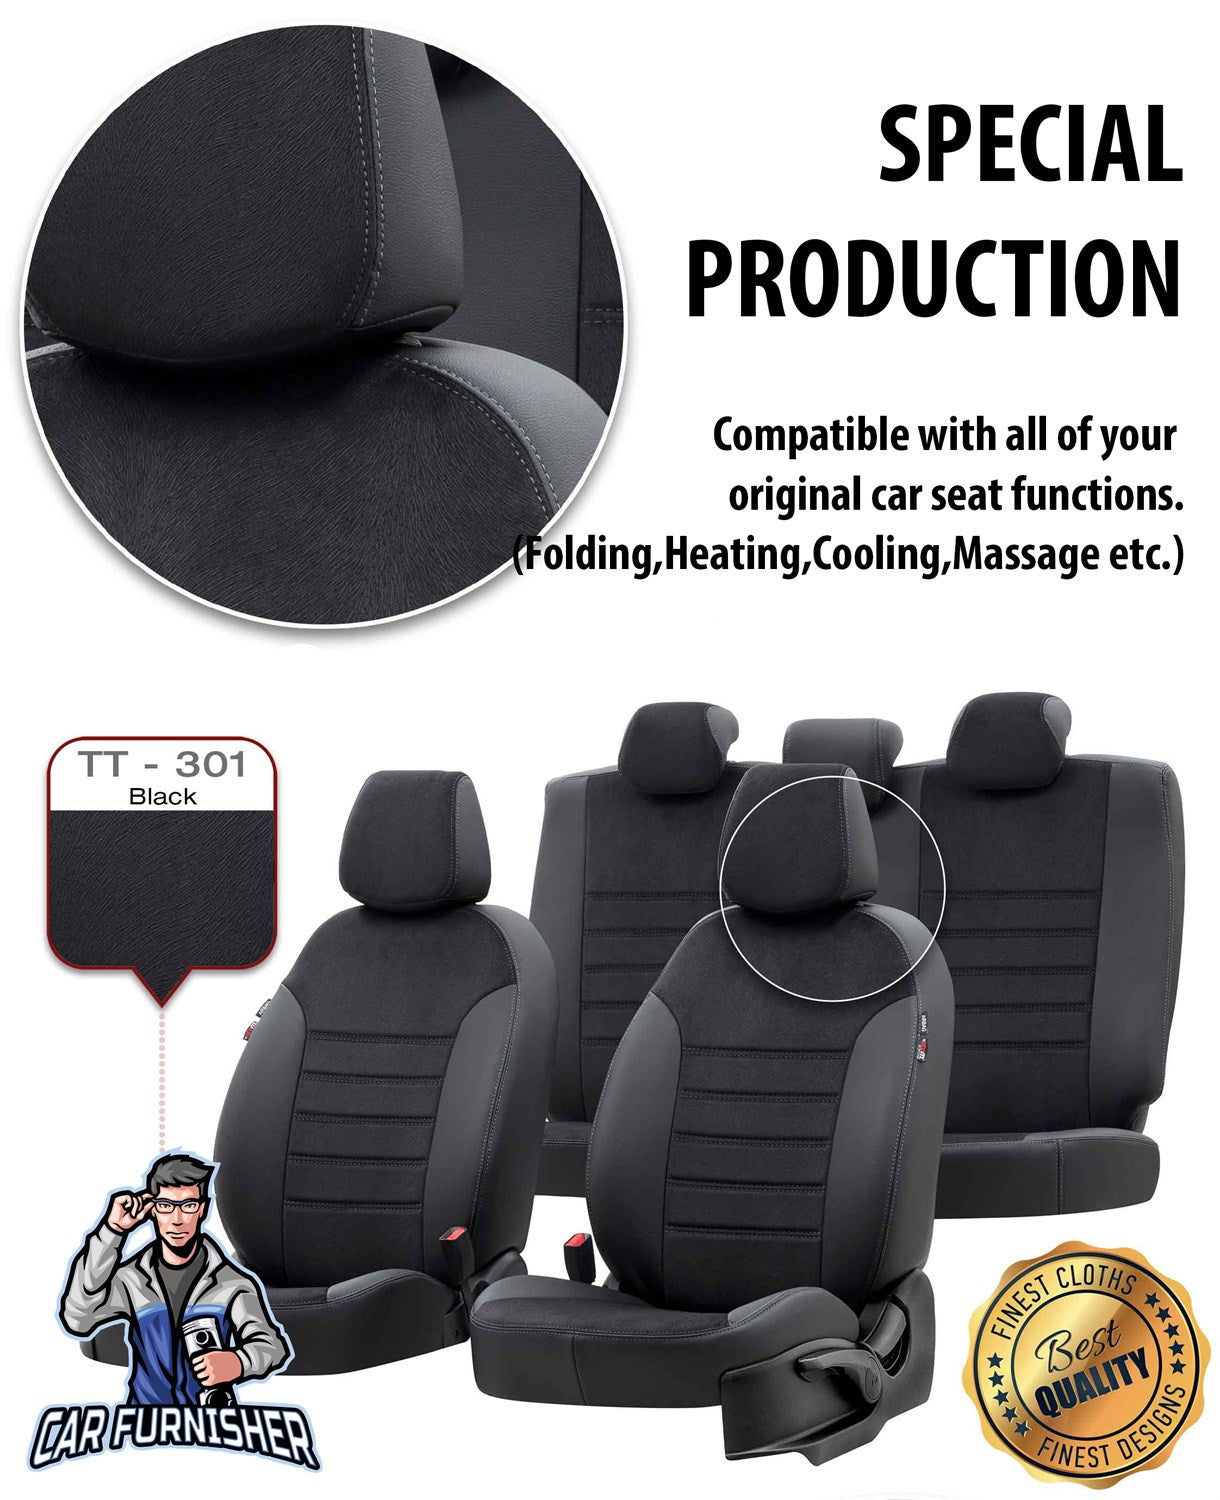 Mercedes C Class Seat Covers London Foal Feather Design Black Leather & Foal Feather